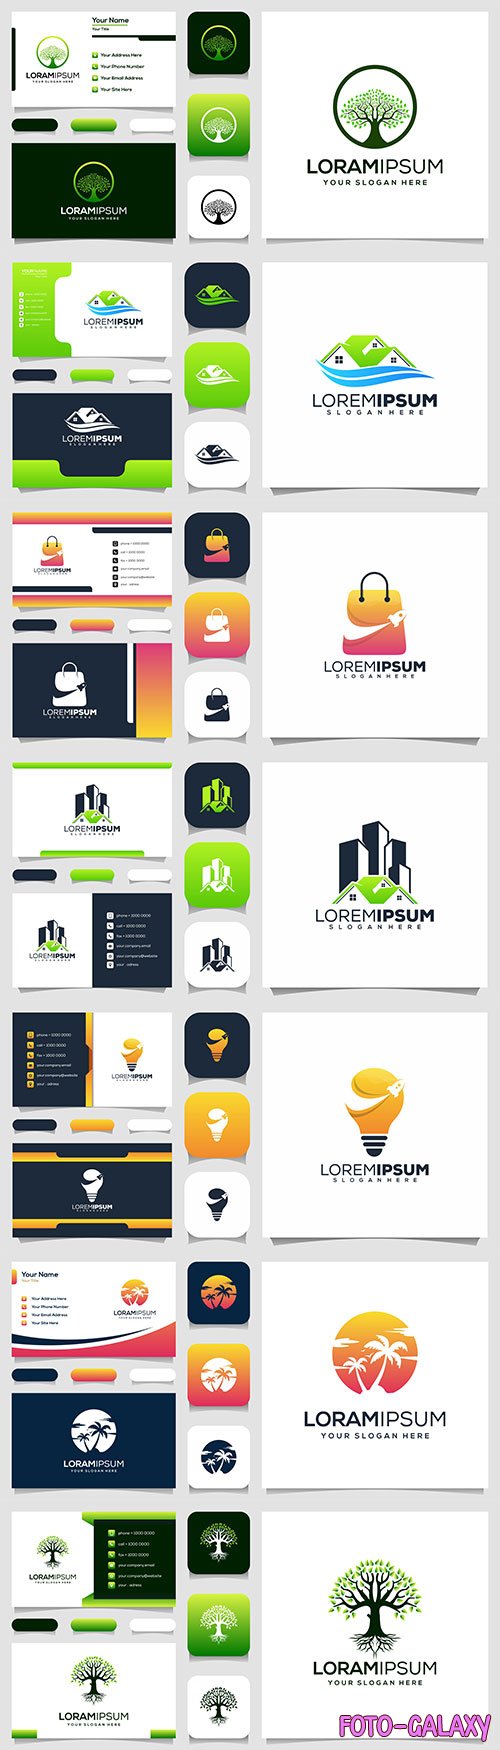 Modern logo and business card premium vector